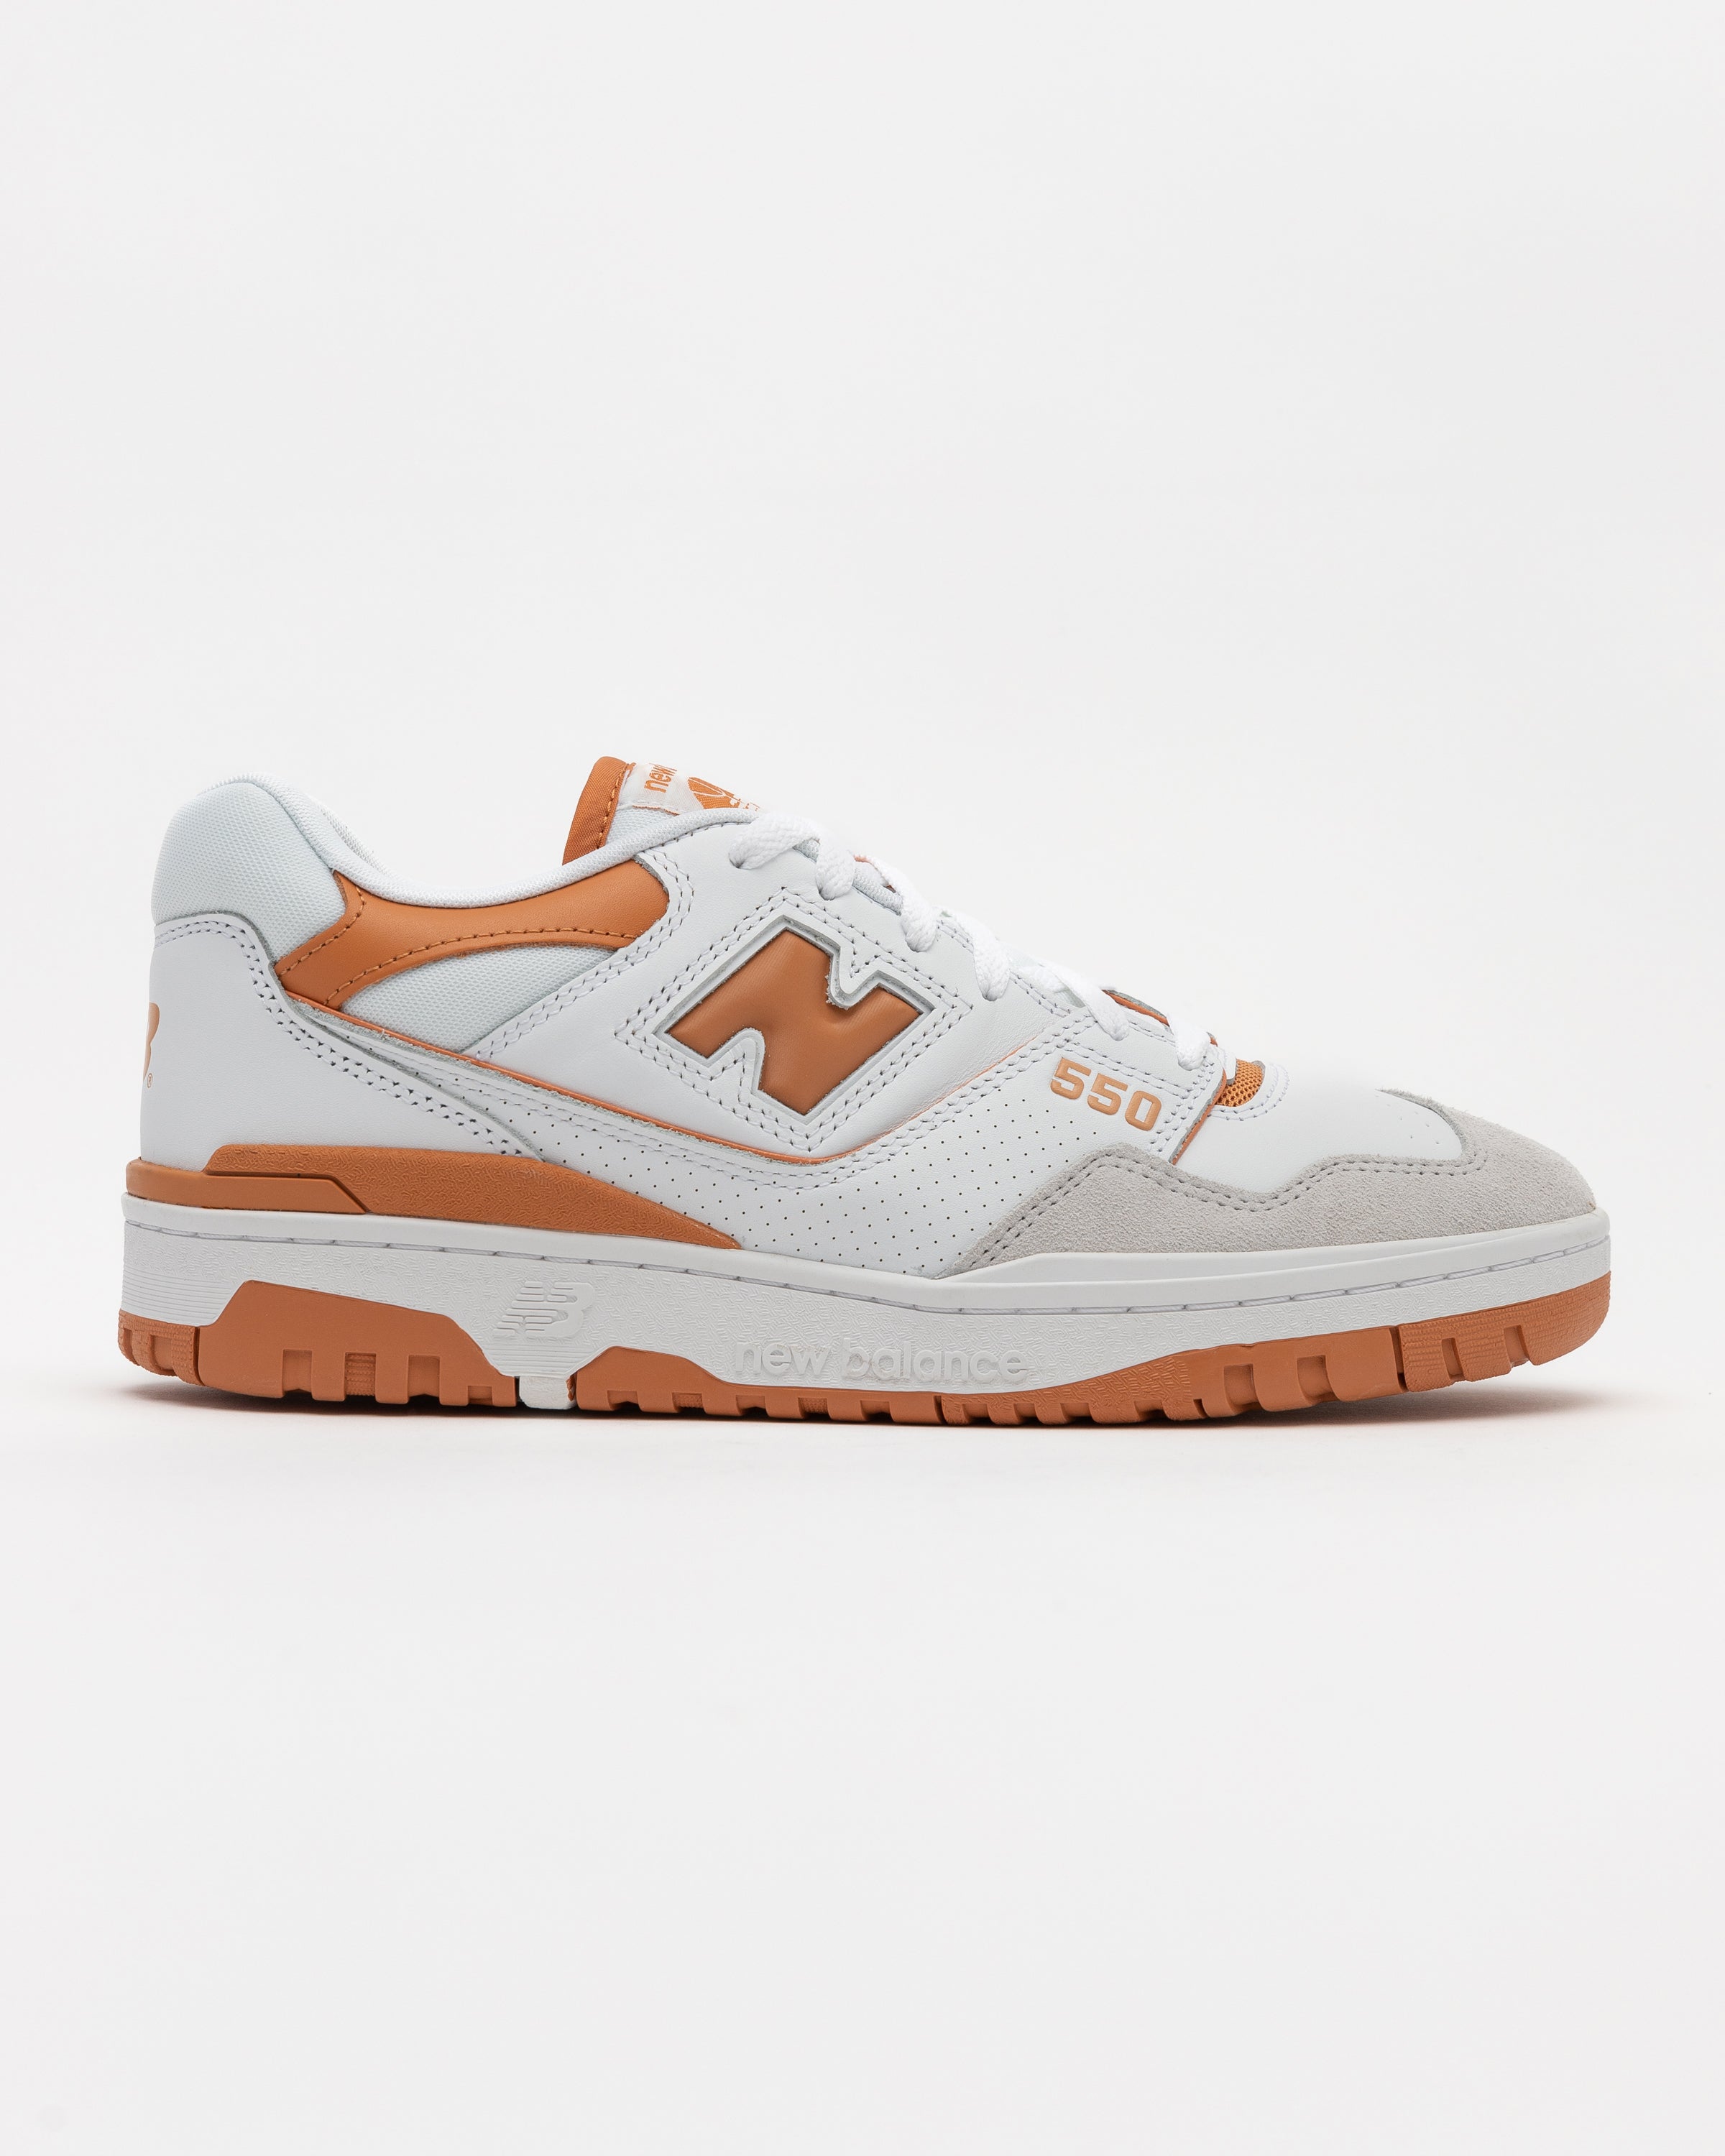 550 in White and Brown